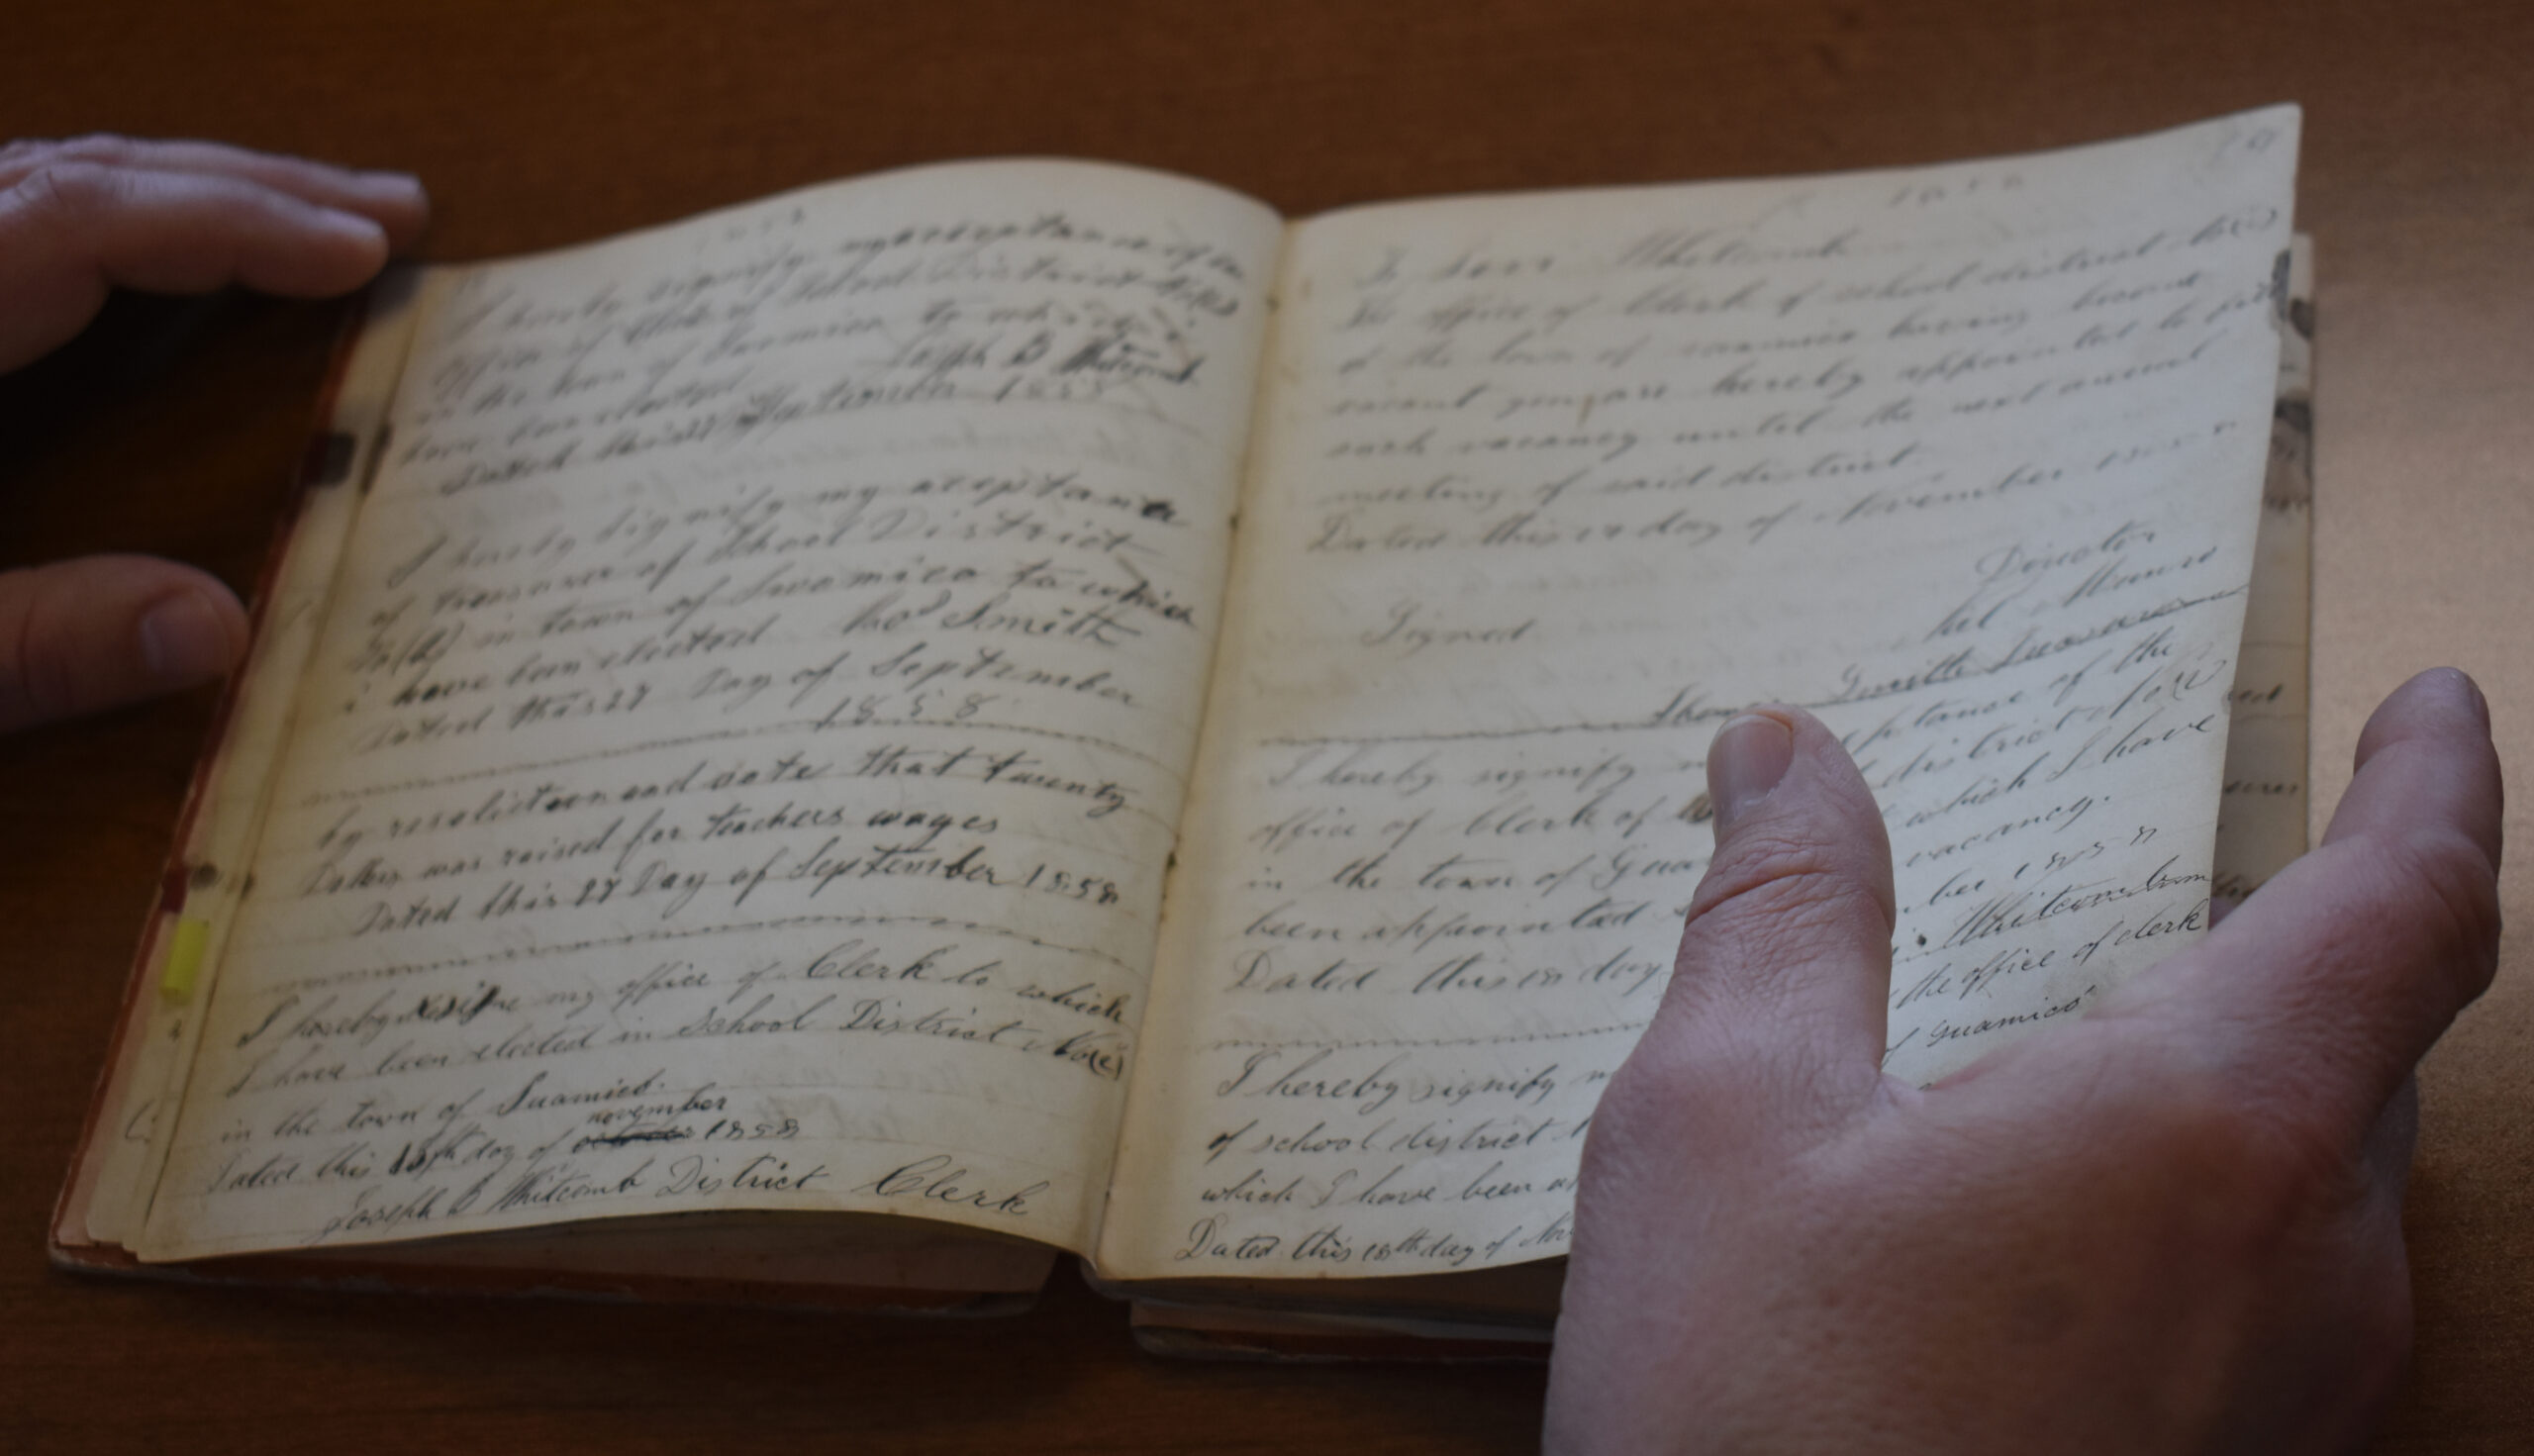 Minutes from a community meeting held in the Town of Pittsfield, Wis., on Nov. 15, 1856